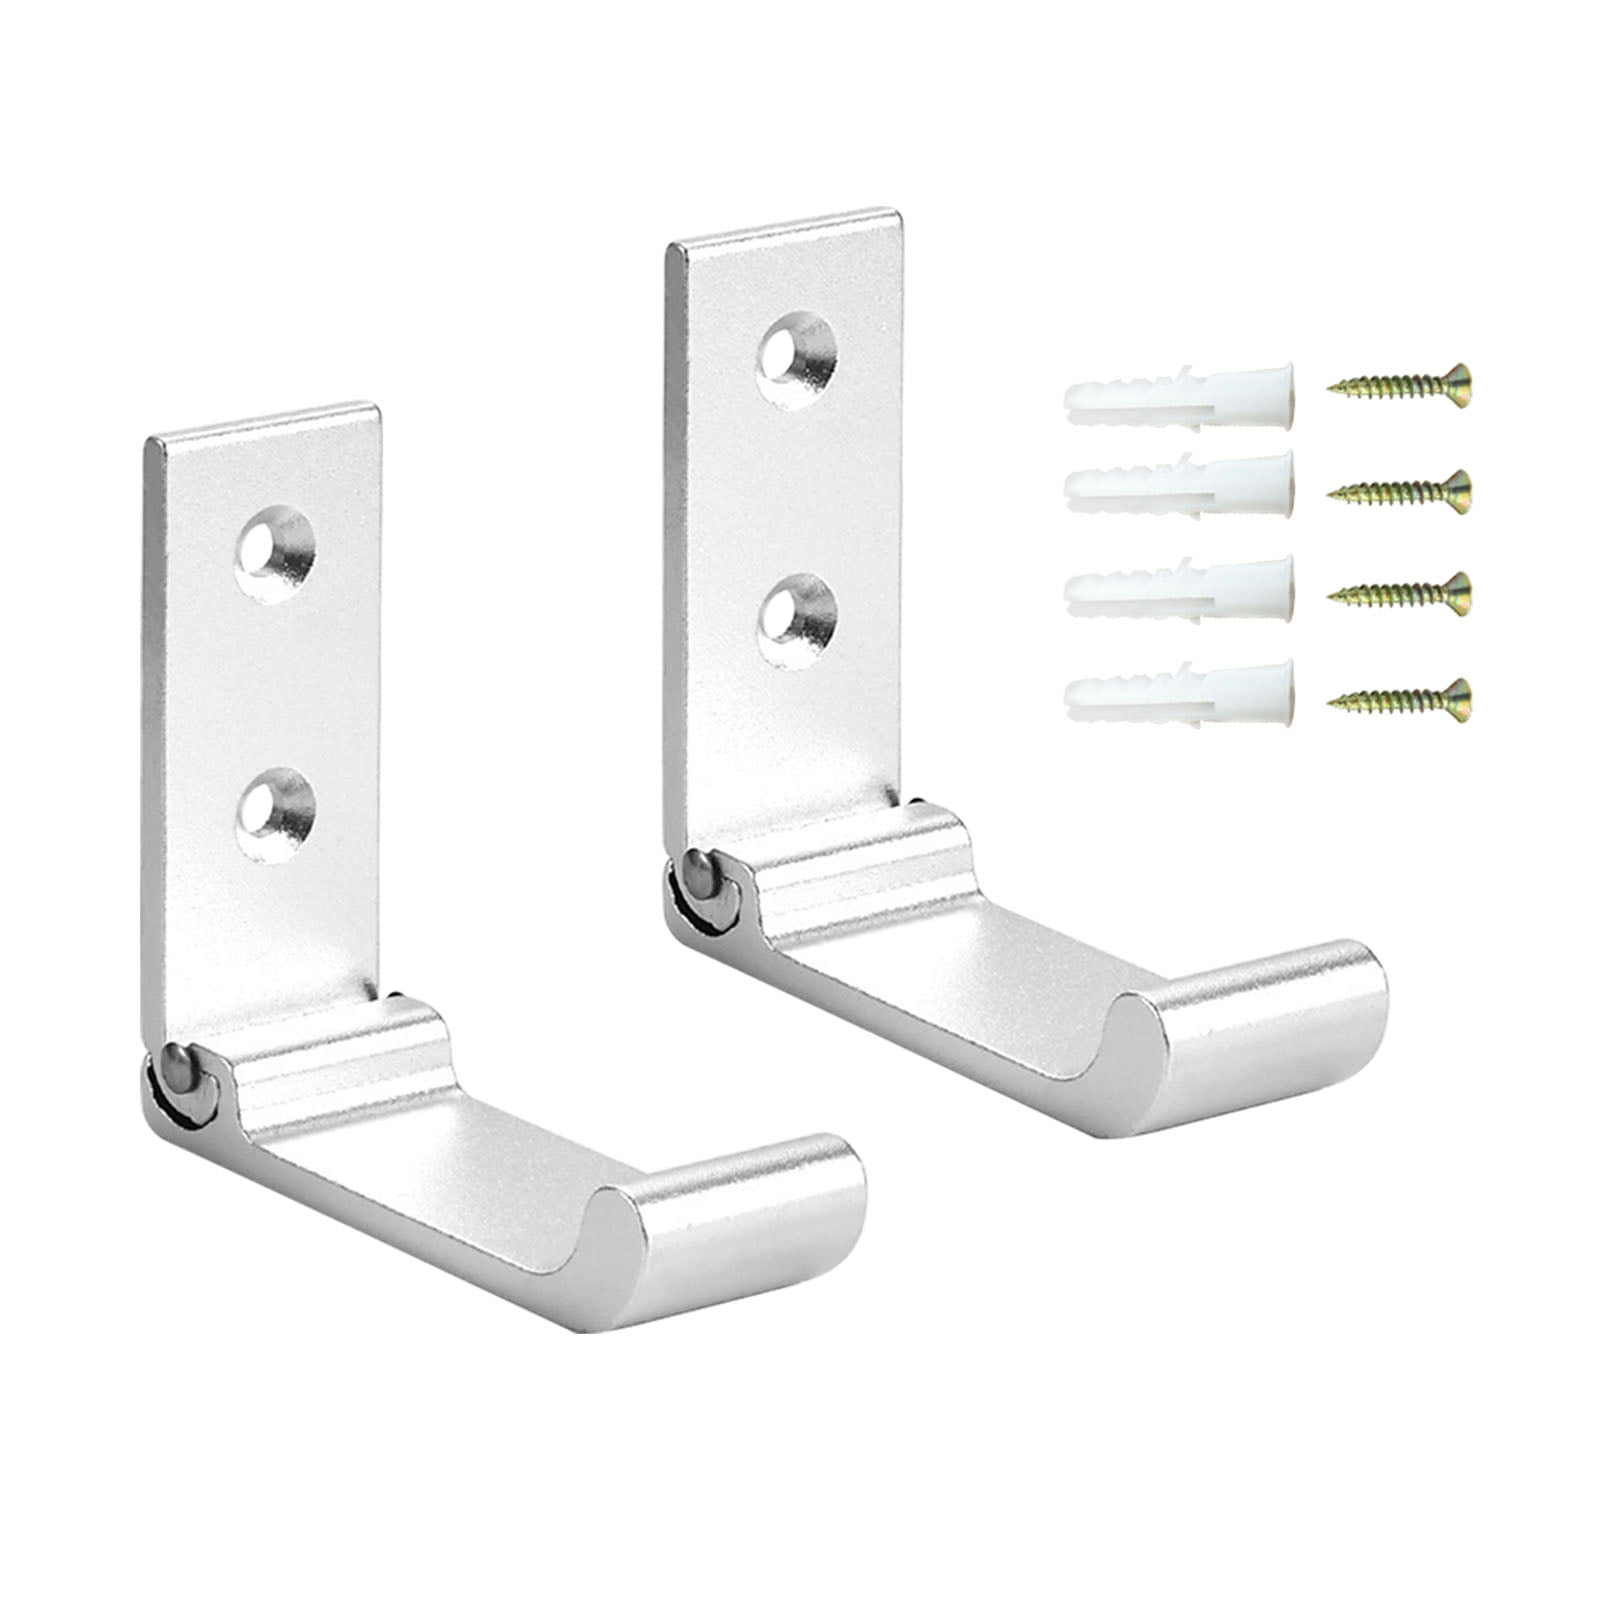 Details about   2 pieces/bag wall-mounted coat hooks living room folding space aluminum hangers